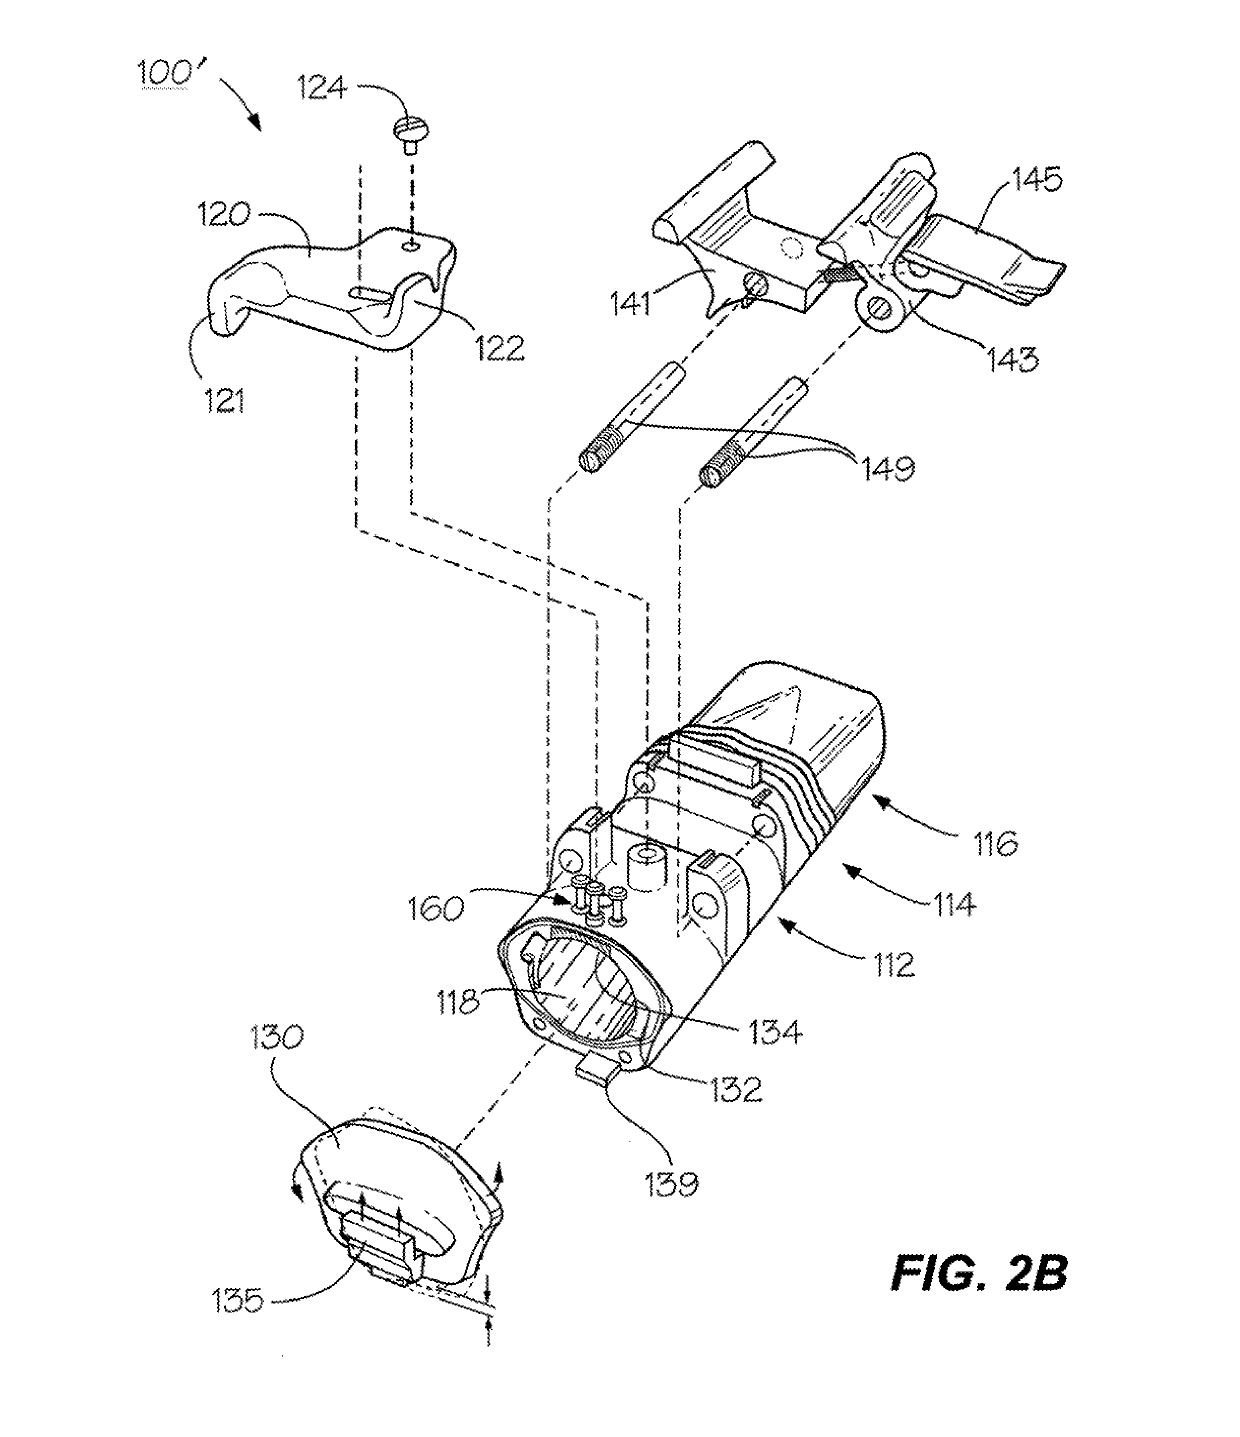 Retention holster for a firearm having an offset mounted accessory